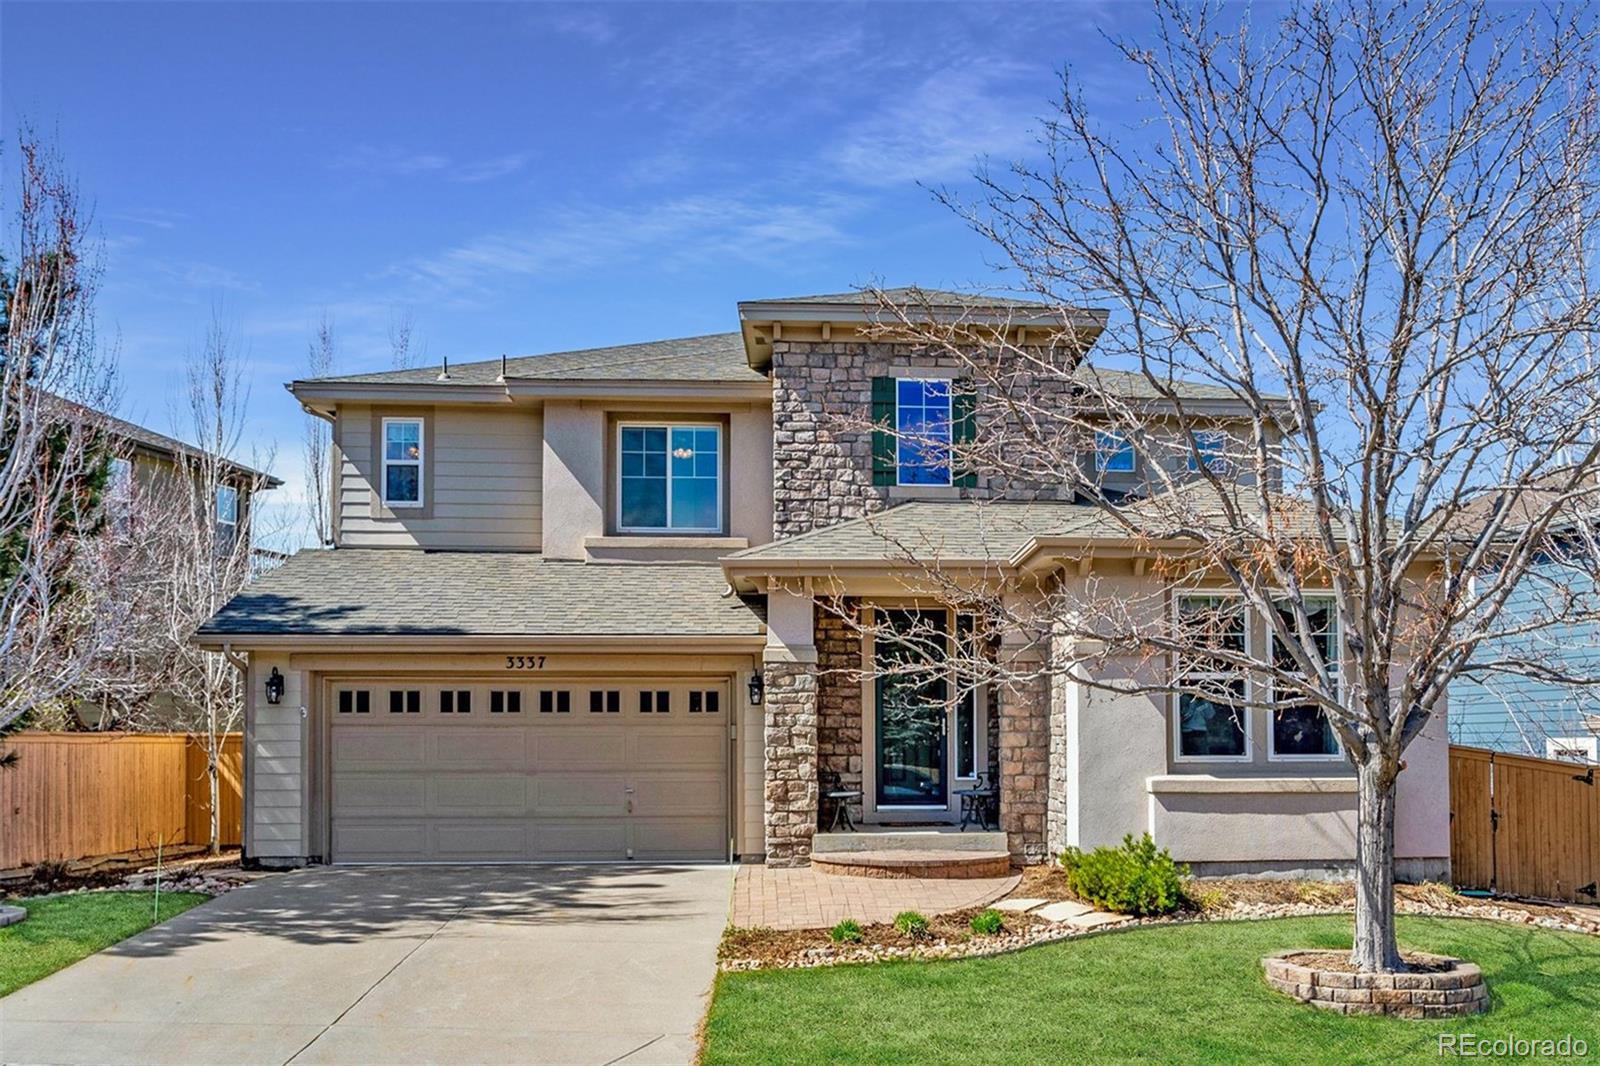 Photo one of 3337 Chandon Way Highlands Ranch CO 80126 | MLS 2979797